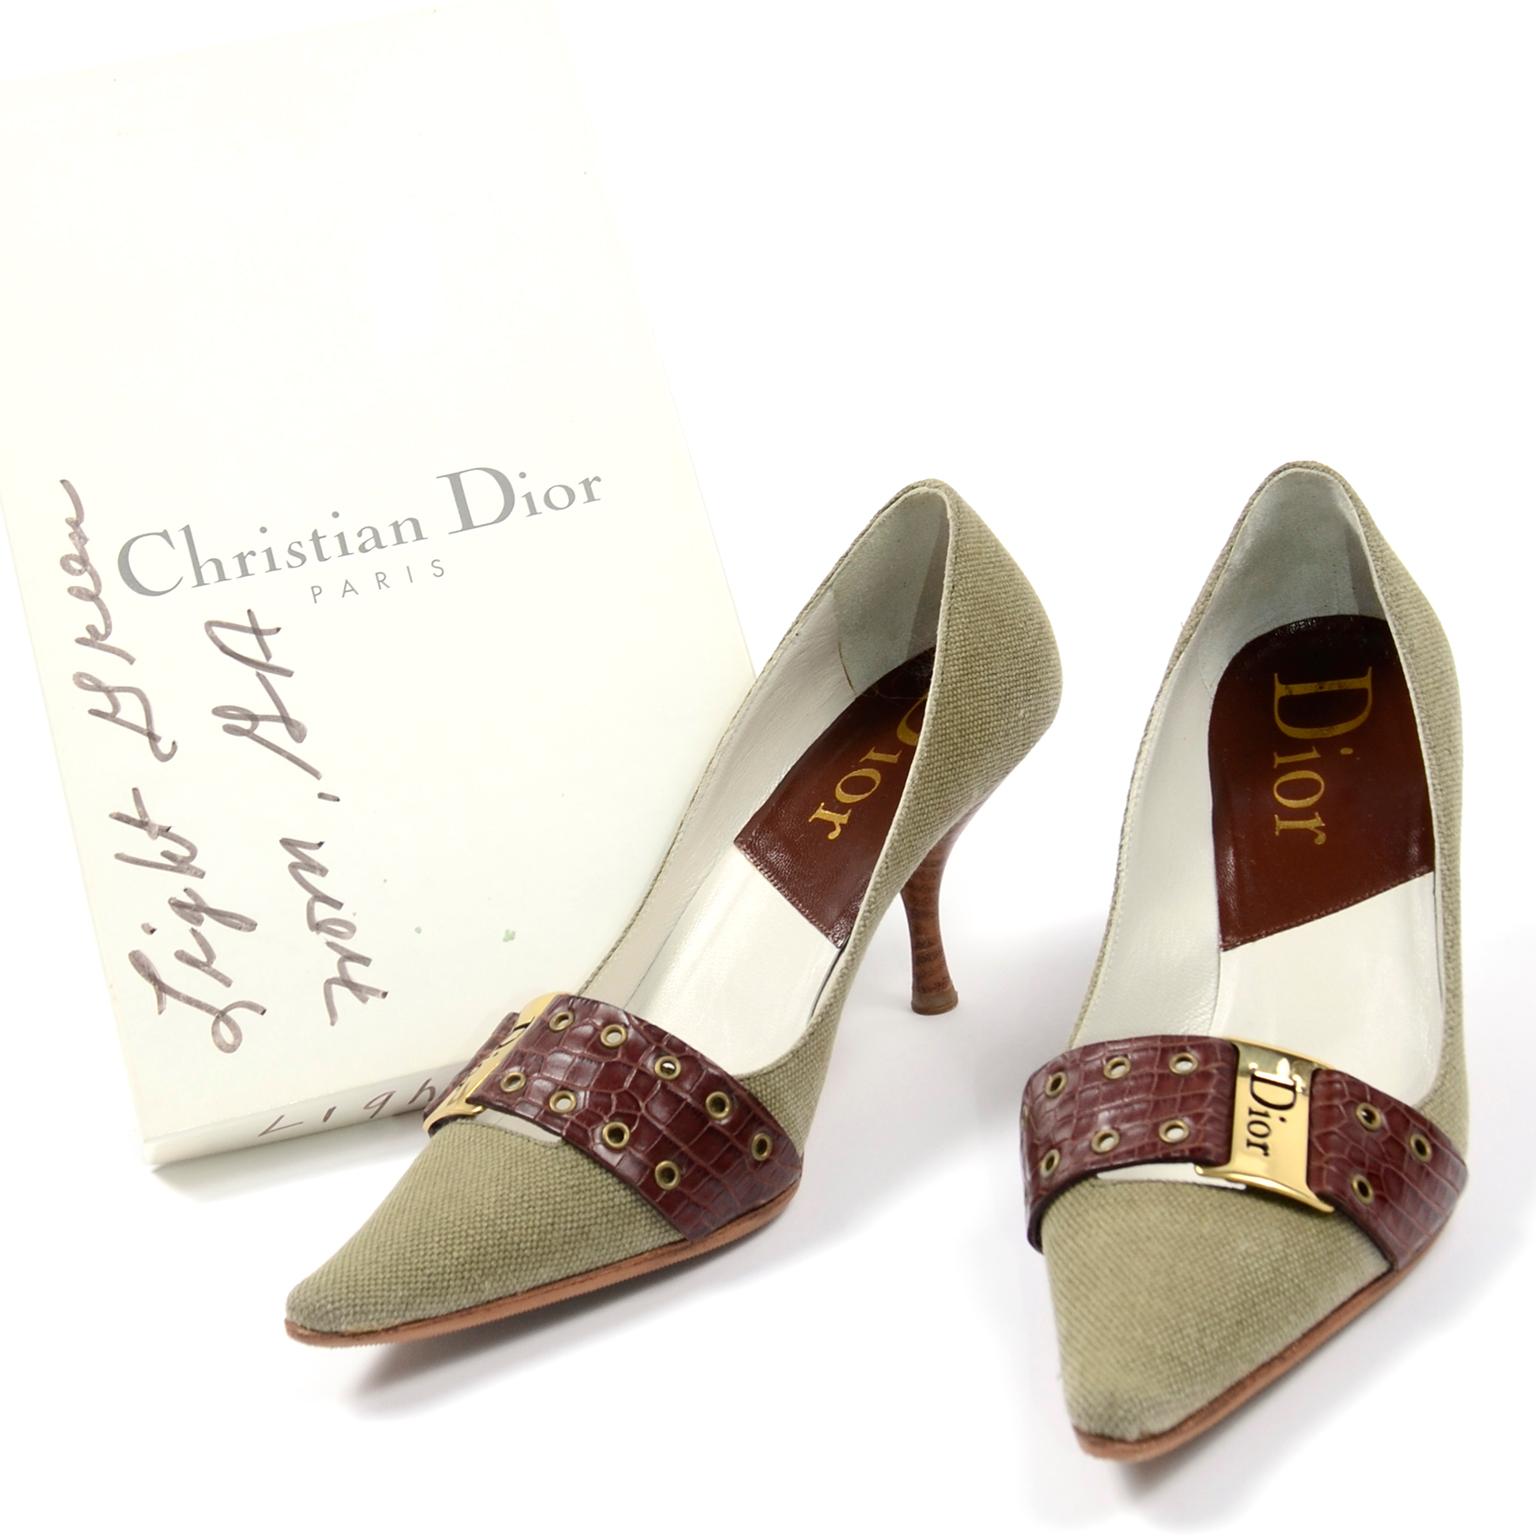 These are fabulous Christian Dior light green textured fabric heels with a brown crocodile embossed leather strap with branded Dior on the buckle. The stacked wood heels of these shoes are gently contoured for a very comfortable fit. These shoes